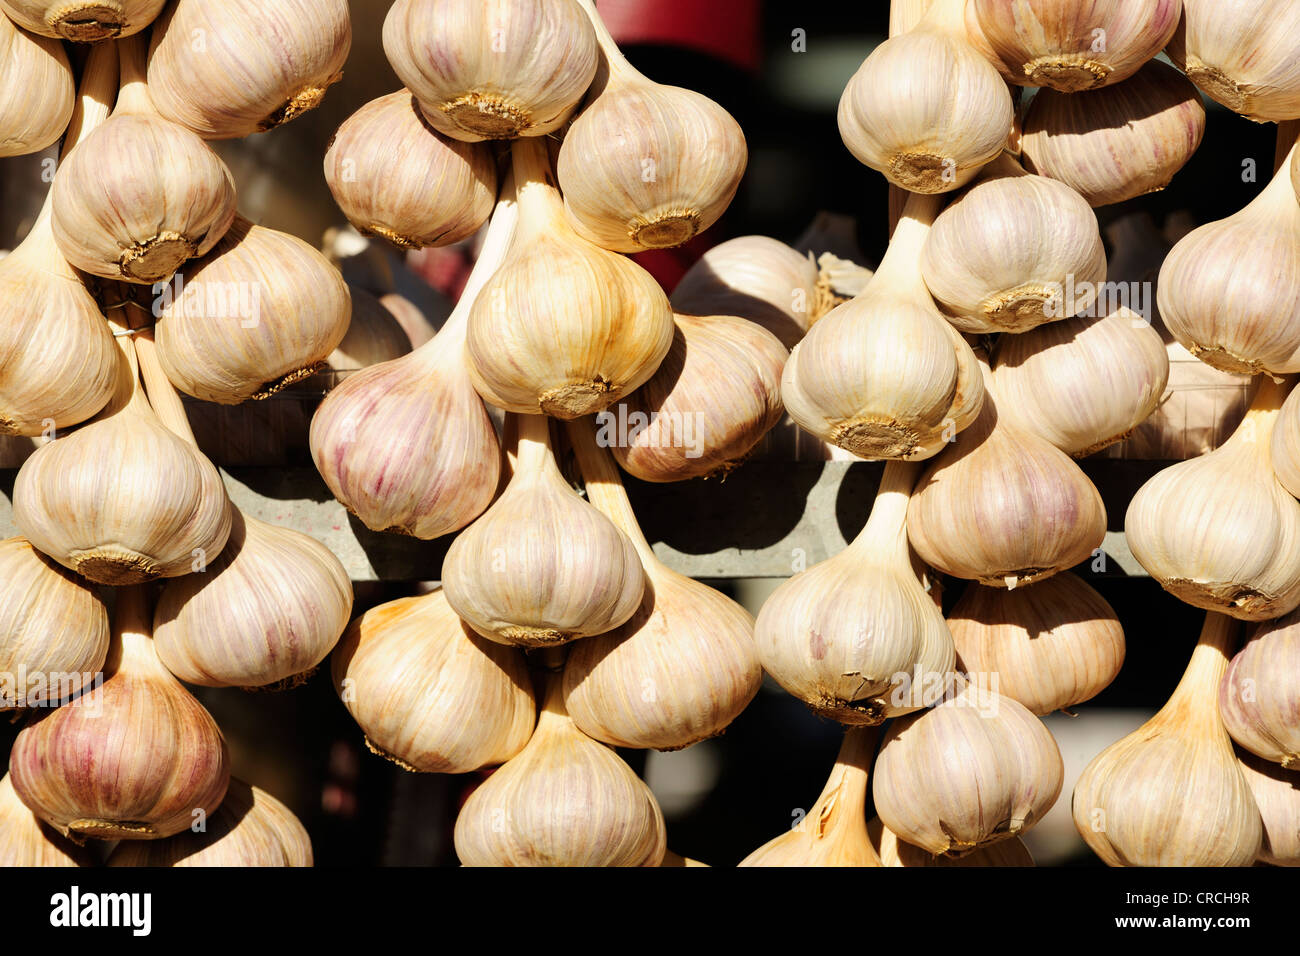 Garlic, market display at a market in Montreal, Quebec, Canada Stock Photo